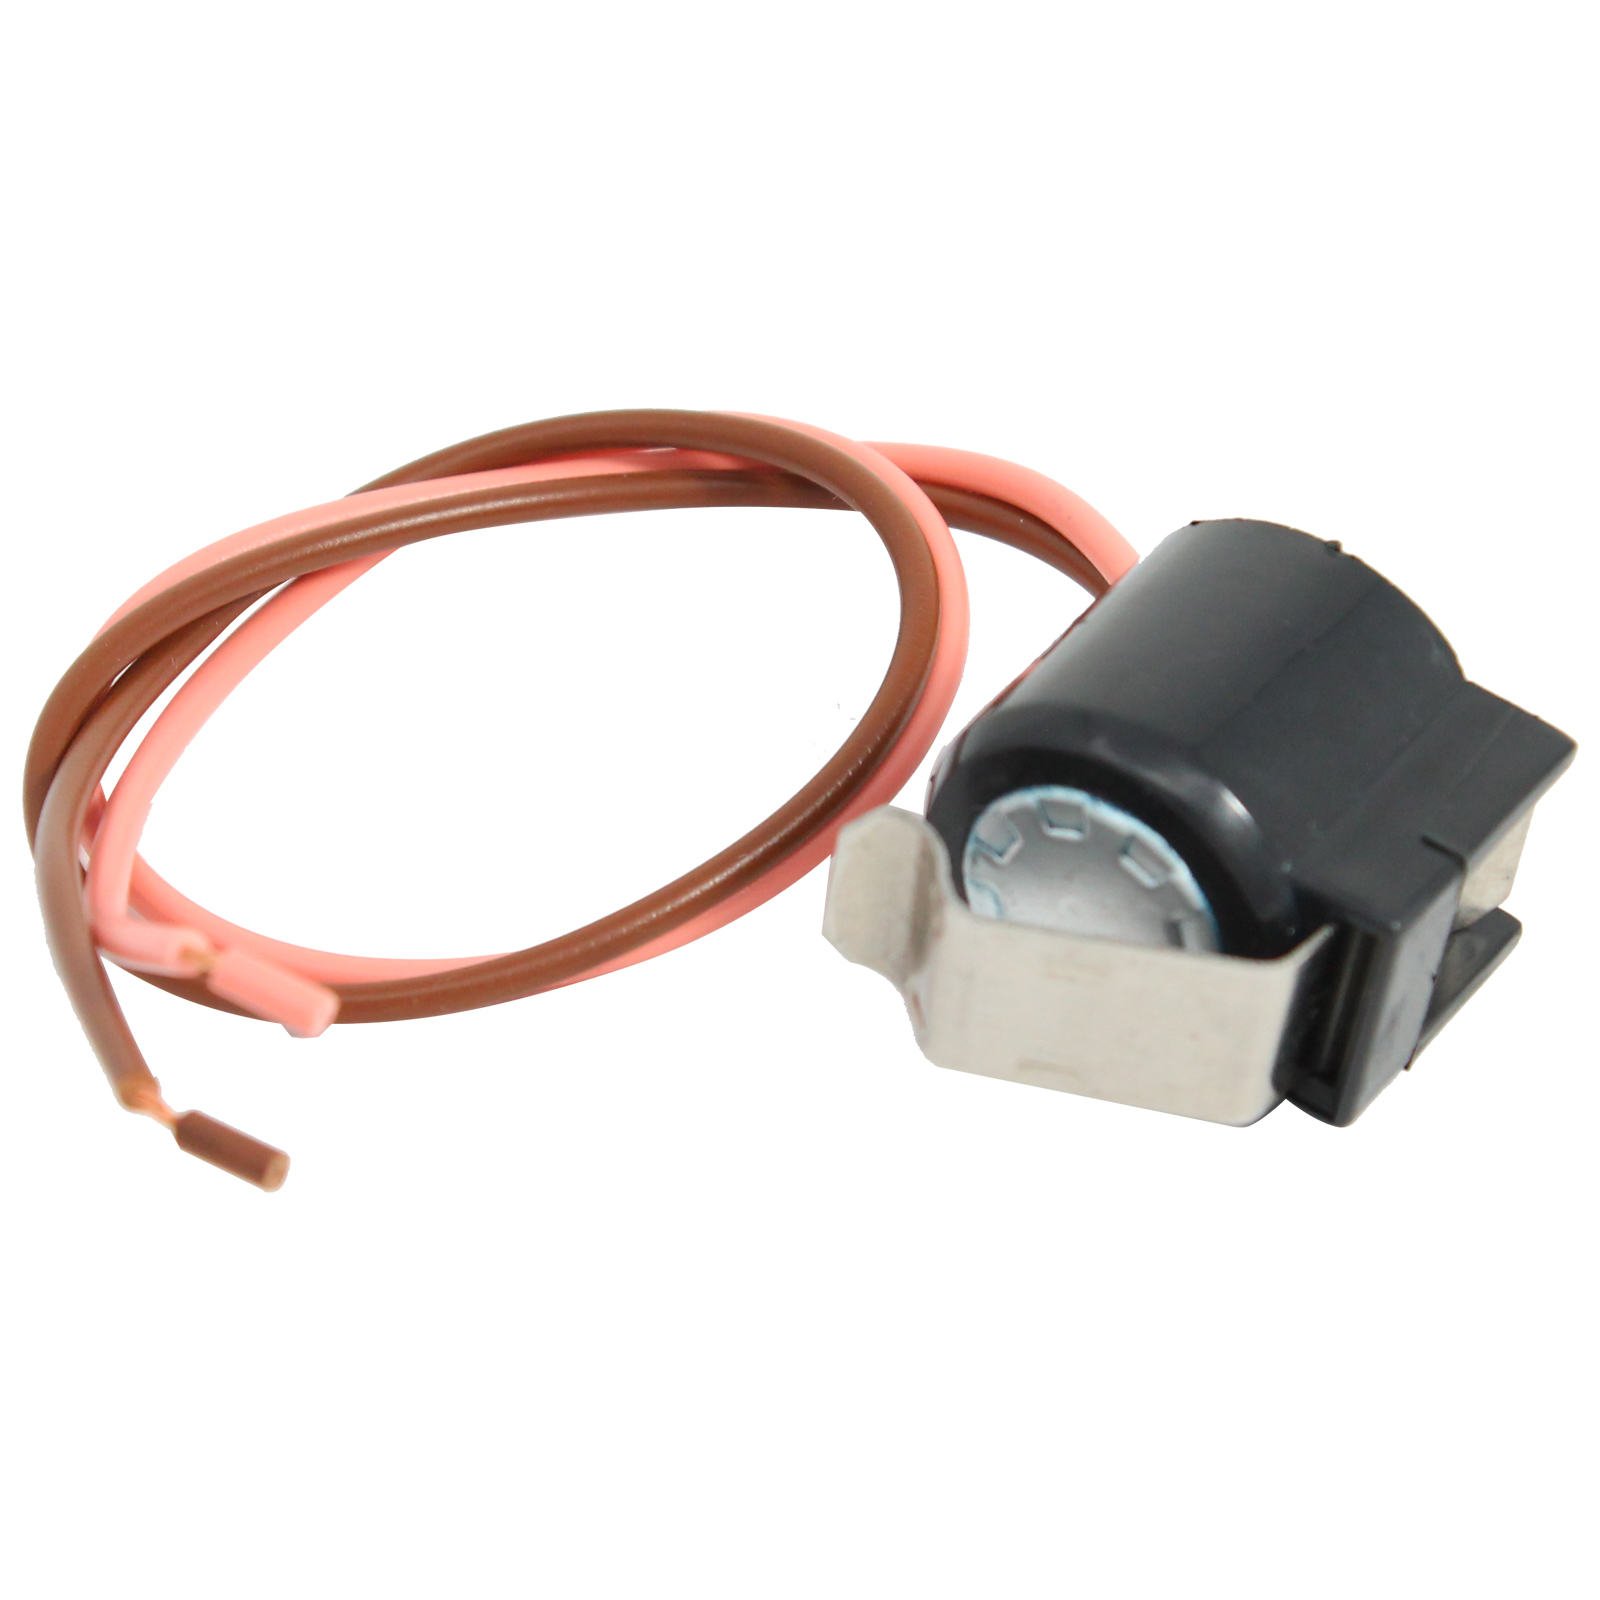 W10225581 Defrost Thermostat Replacement for Whirlpool 3ED22DQXDN00 Refrigerator - Compatible with W10225581 Defrost Bimetal Thermostat - UpStart Components Brand - image 2 of 2